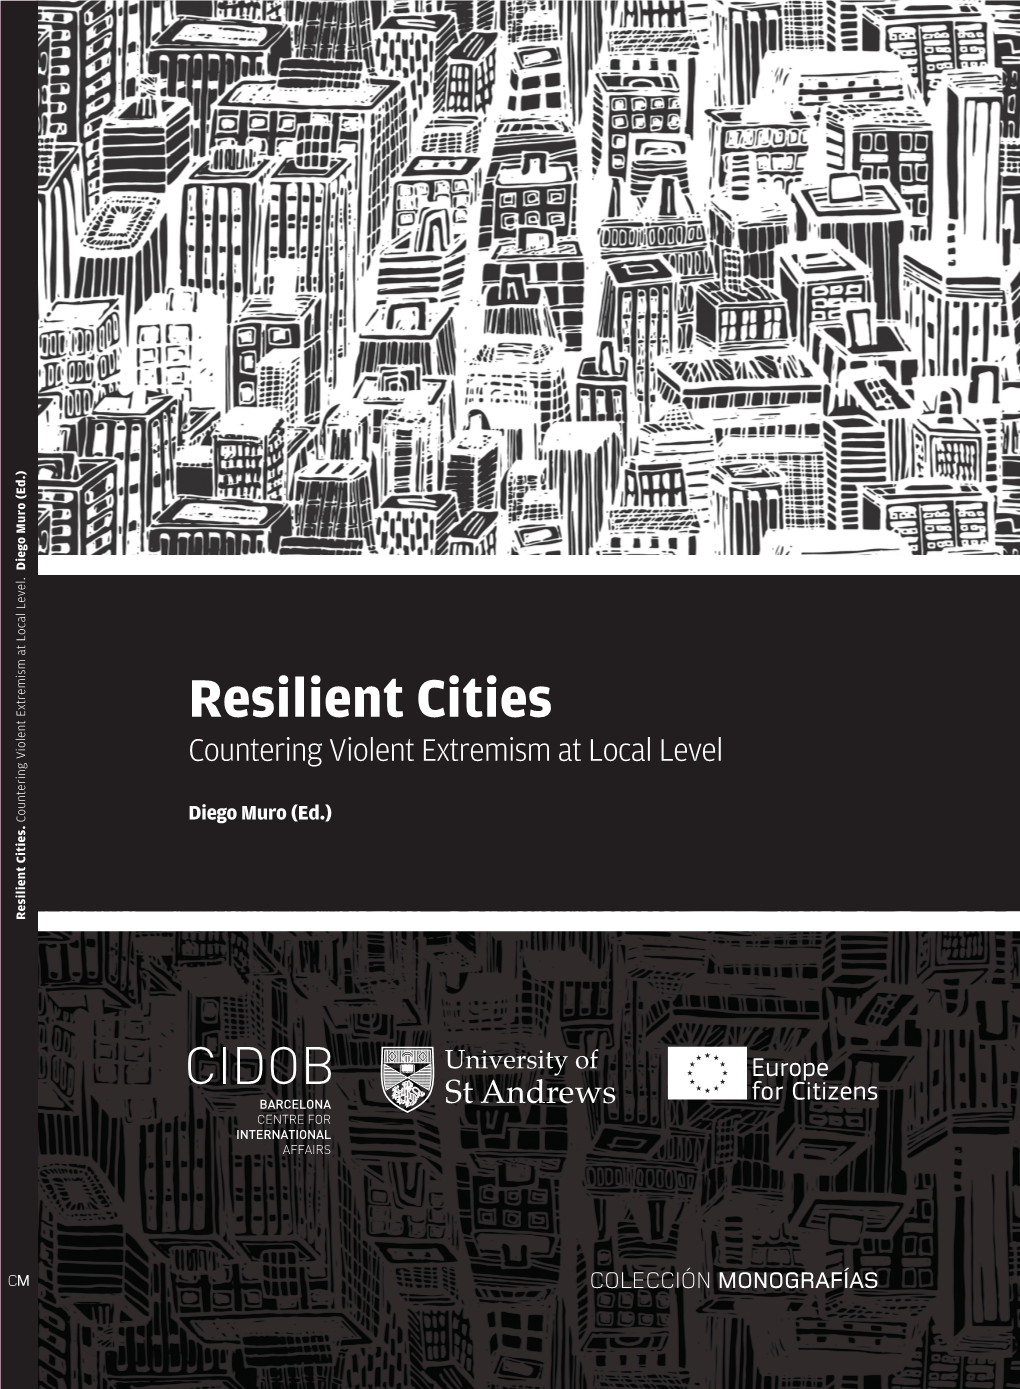 Resilient Cities of the Fight Against Radicalisation